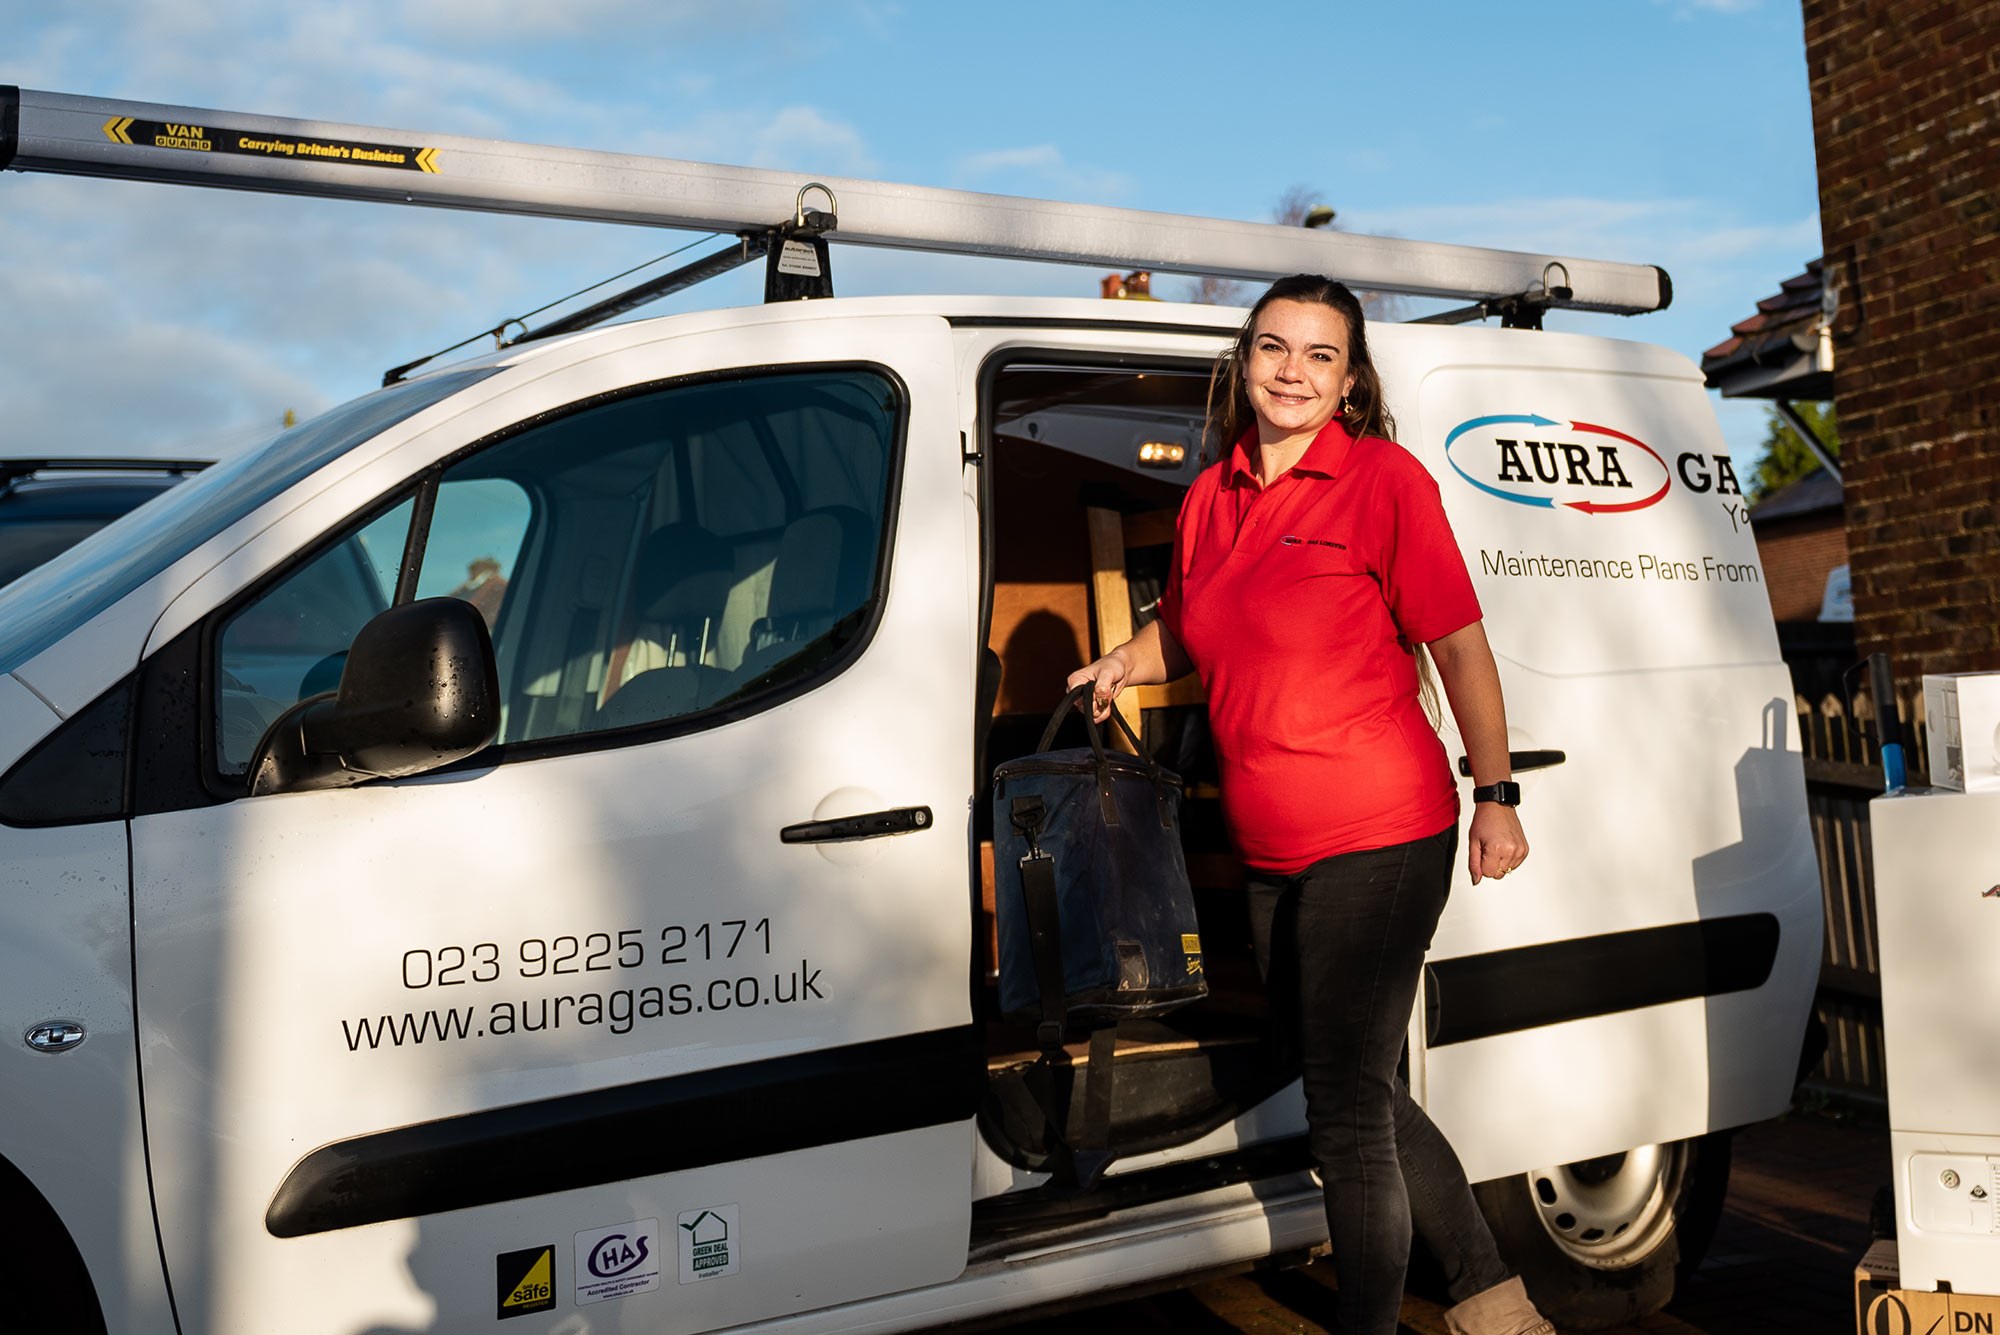 How Can We Attract More Women to the Heating Industry? 